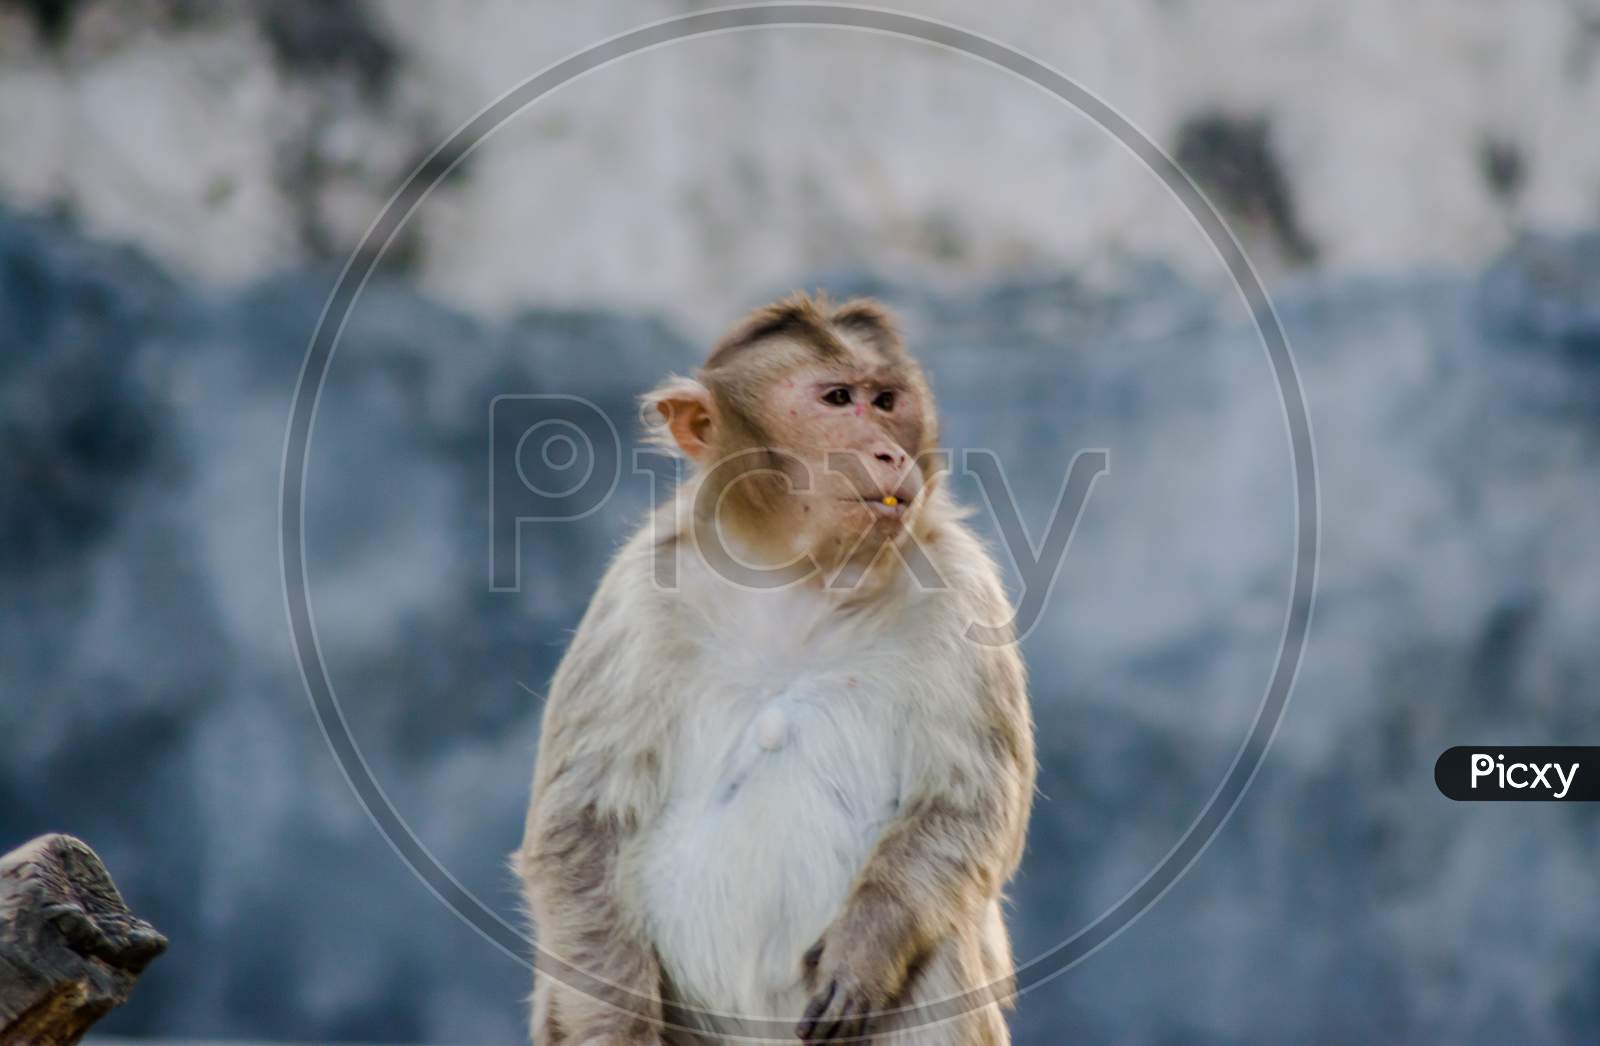 Monkey is a common name that may refer to groups or species of mammals, in part, the simians of infraorder Simiiformes.